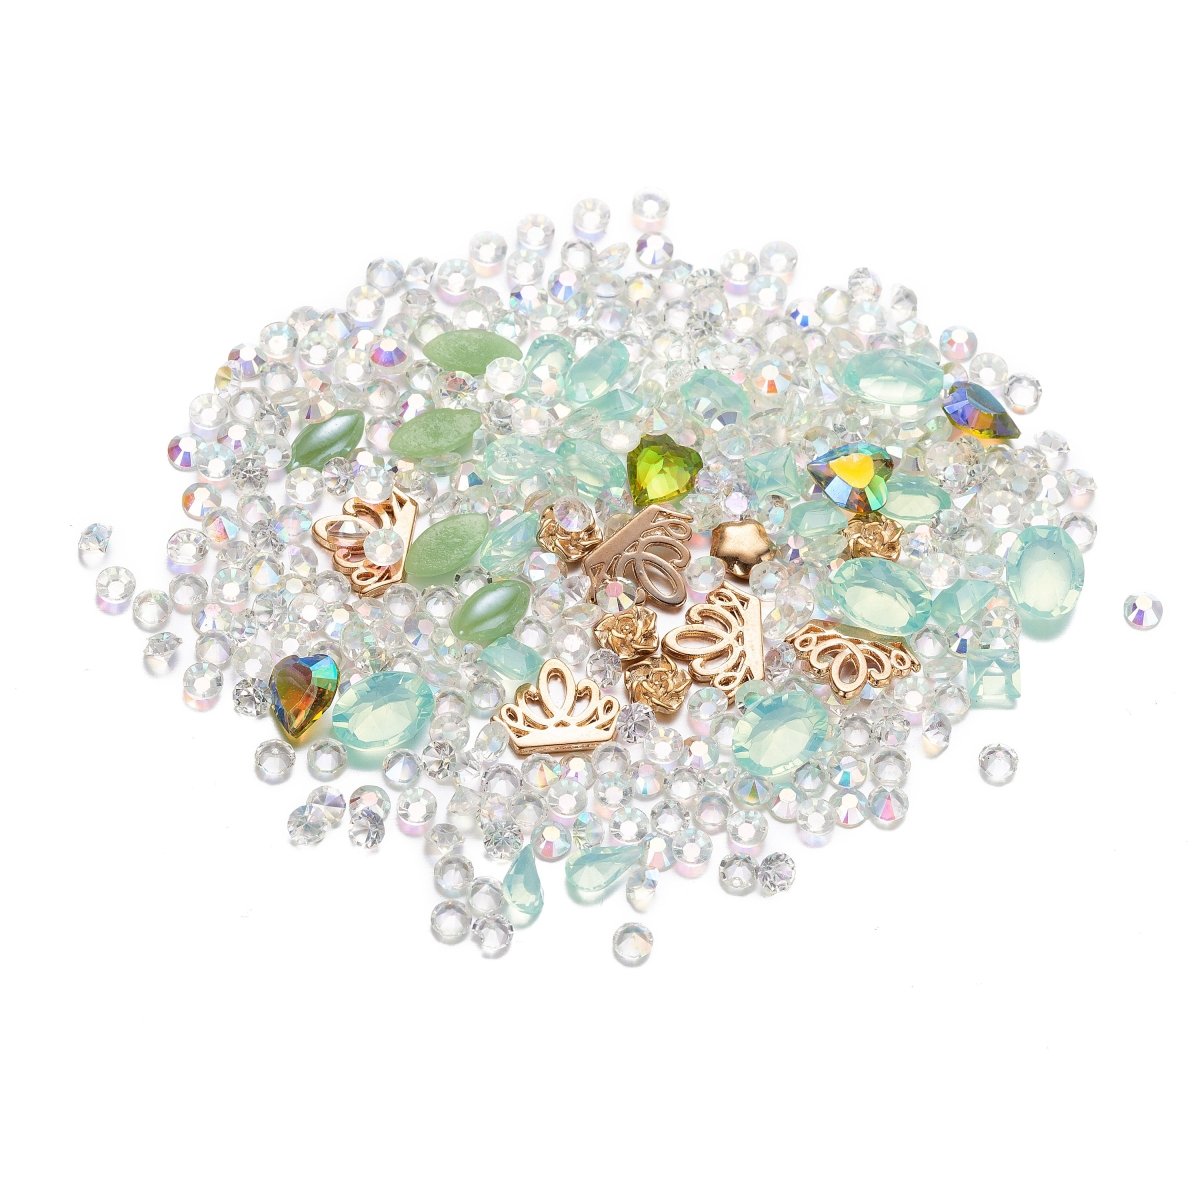 Assorted Crystal - Crystal AB, Yellow / Teal / Peach Crystal, Clear Crystal, Gold Decor - Mixed Styles, Size Nail Rhinestones, embellishment - DLUXCA